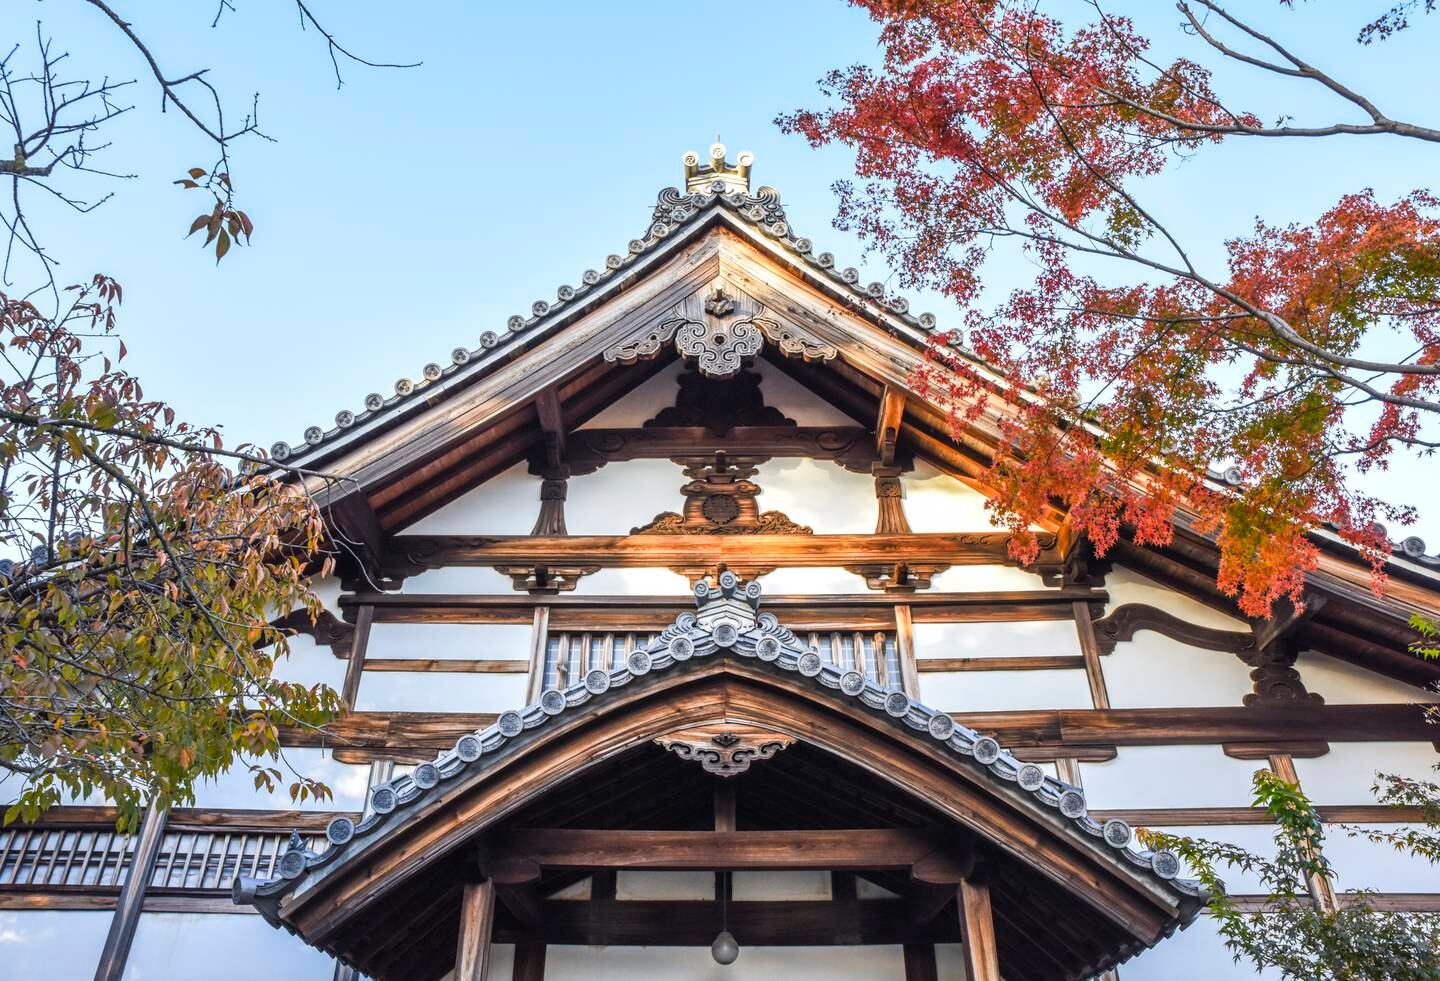 The Kyoto temple was erected as a memorial to Toyotomi Hideyoshi by his wife Kita-no-Mandokor. Photo: Ronan O'Connell